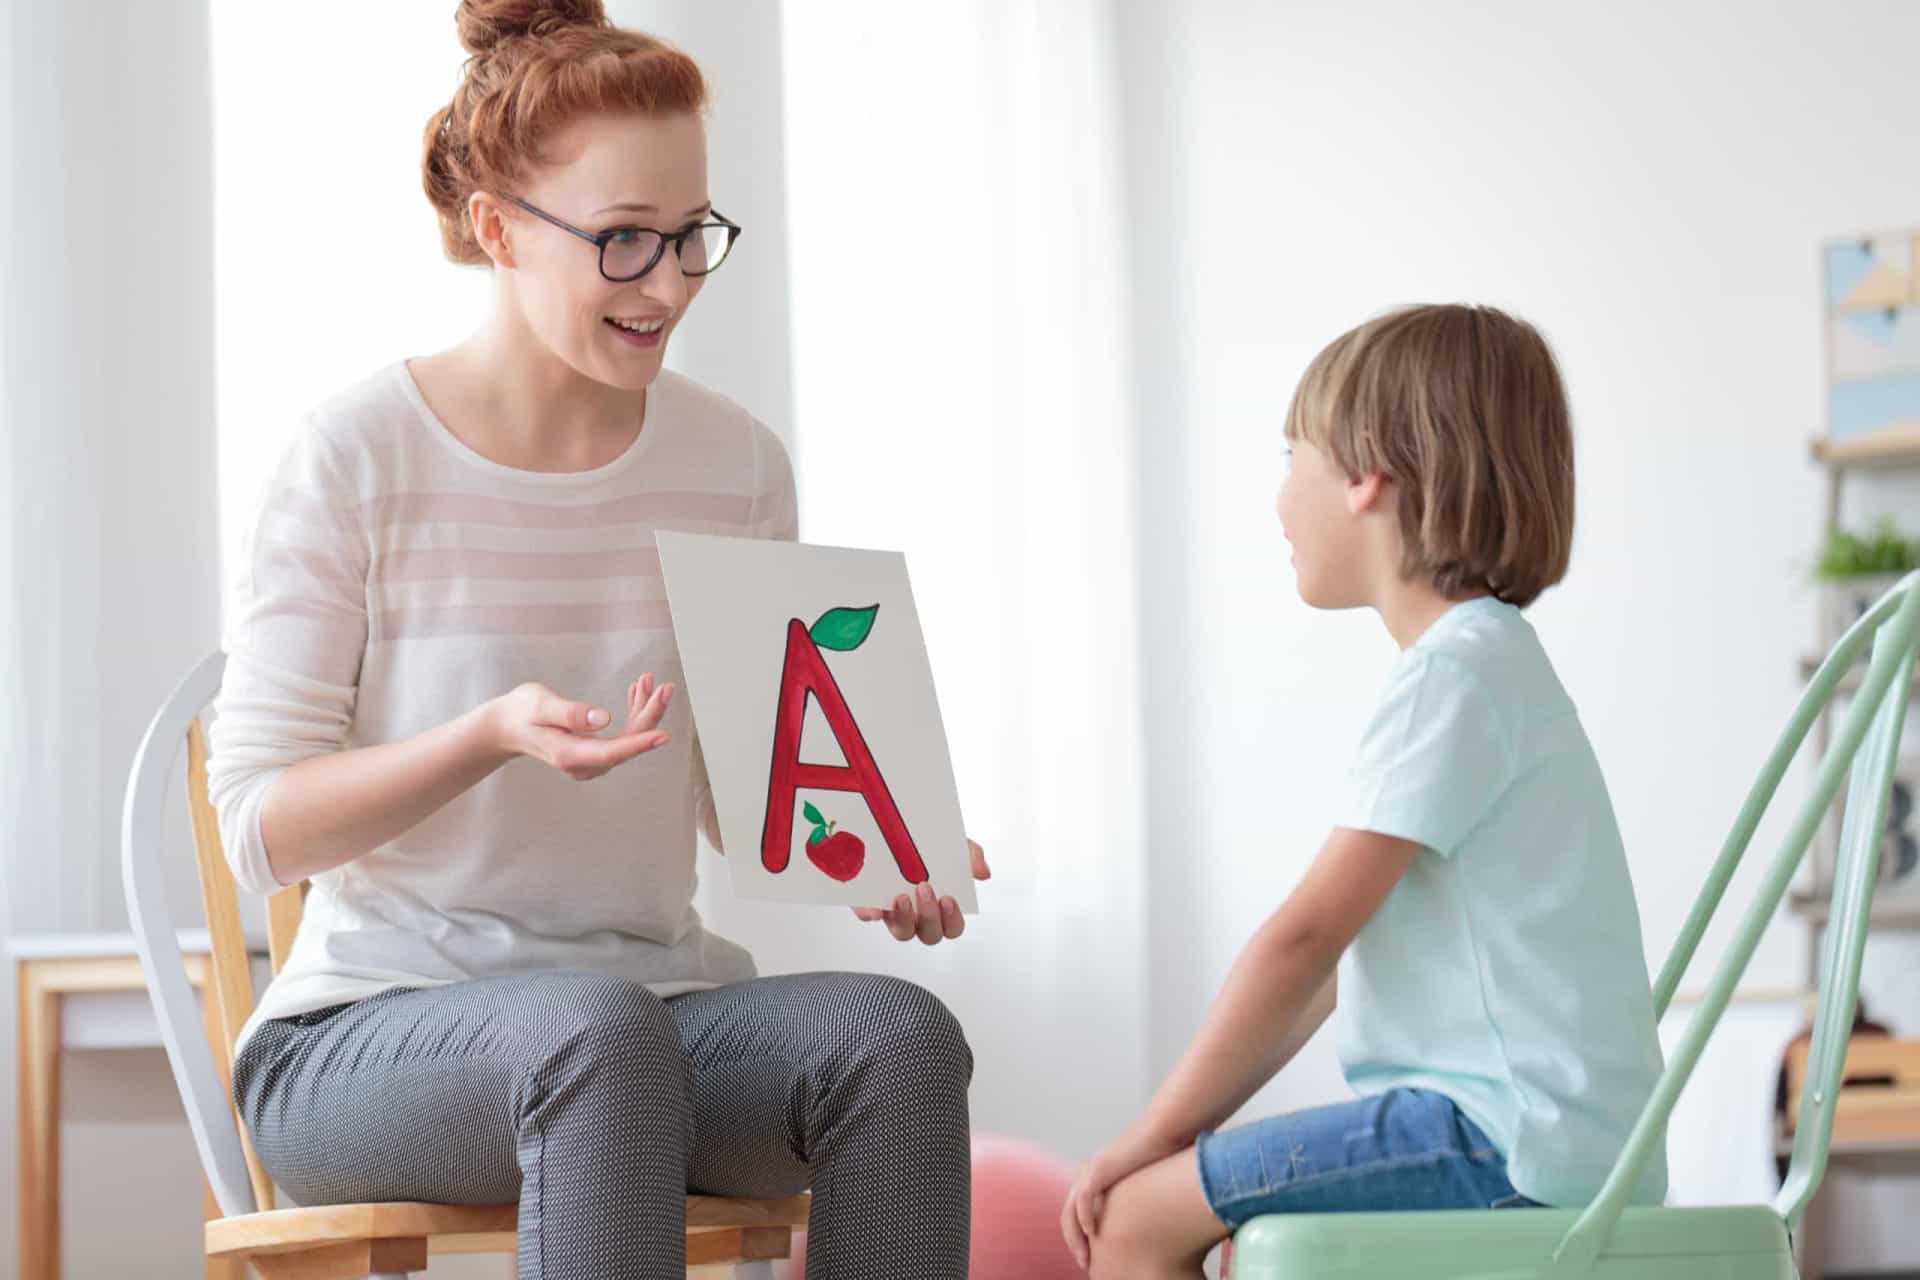 <p><span>If you suspect your child may have selective mutism and there is no help available at their school, seek a formal diagnosis from a speech and language therapist.</span></p><p>You may also like:<a href="https://www.starsinsider.com/n/324969?utm_source=msn.com&utm_medium=display&utm_campaign=referral_description&utm_content=521574en-sg"> A history of political statements on the red carpet.</a></p>